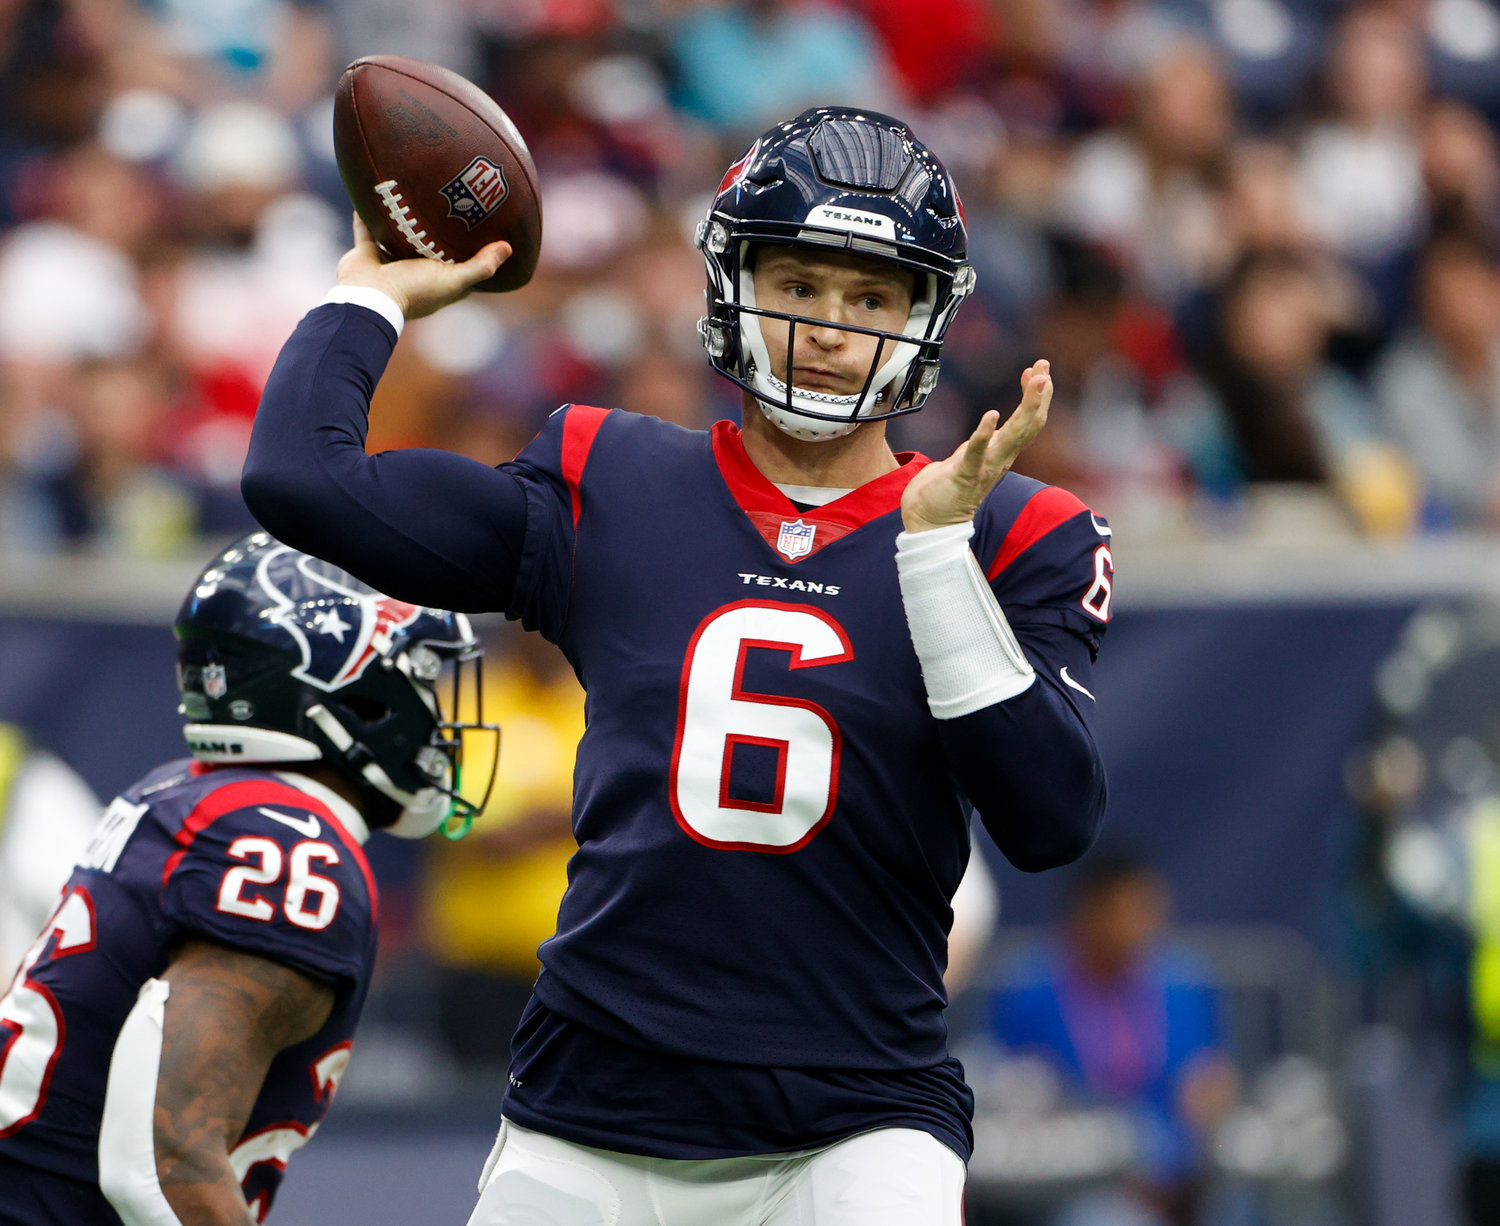 Texans quarterback Jeff Driskel (6) passes the ball during an NFL game between the Houston Texans and the Jacksonville Jaguars on Jan. 1, 2023 in Houston. The Jaguars won, 31-3.